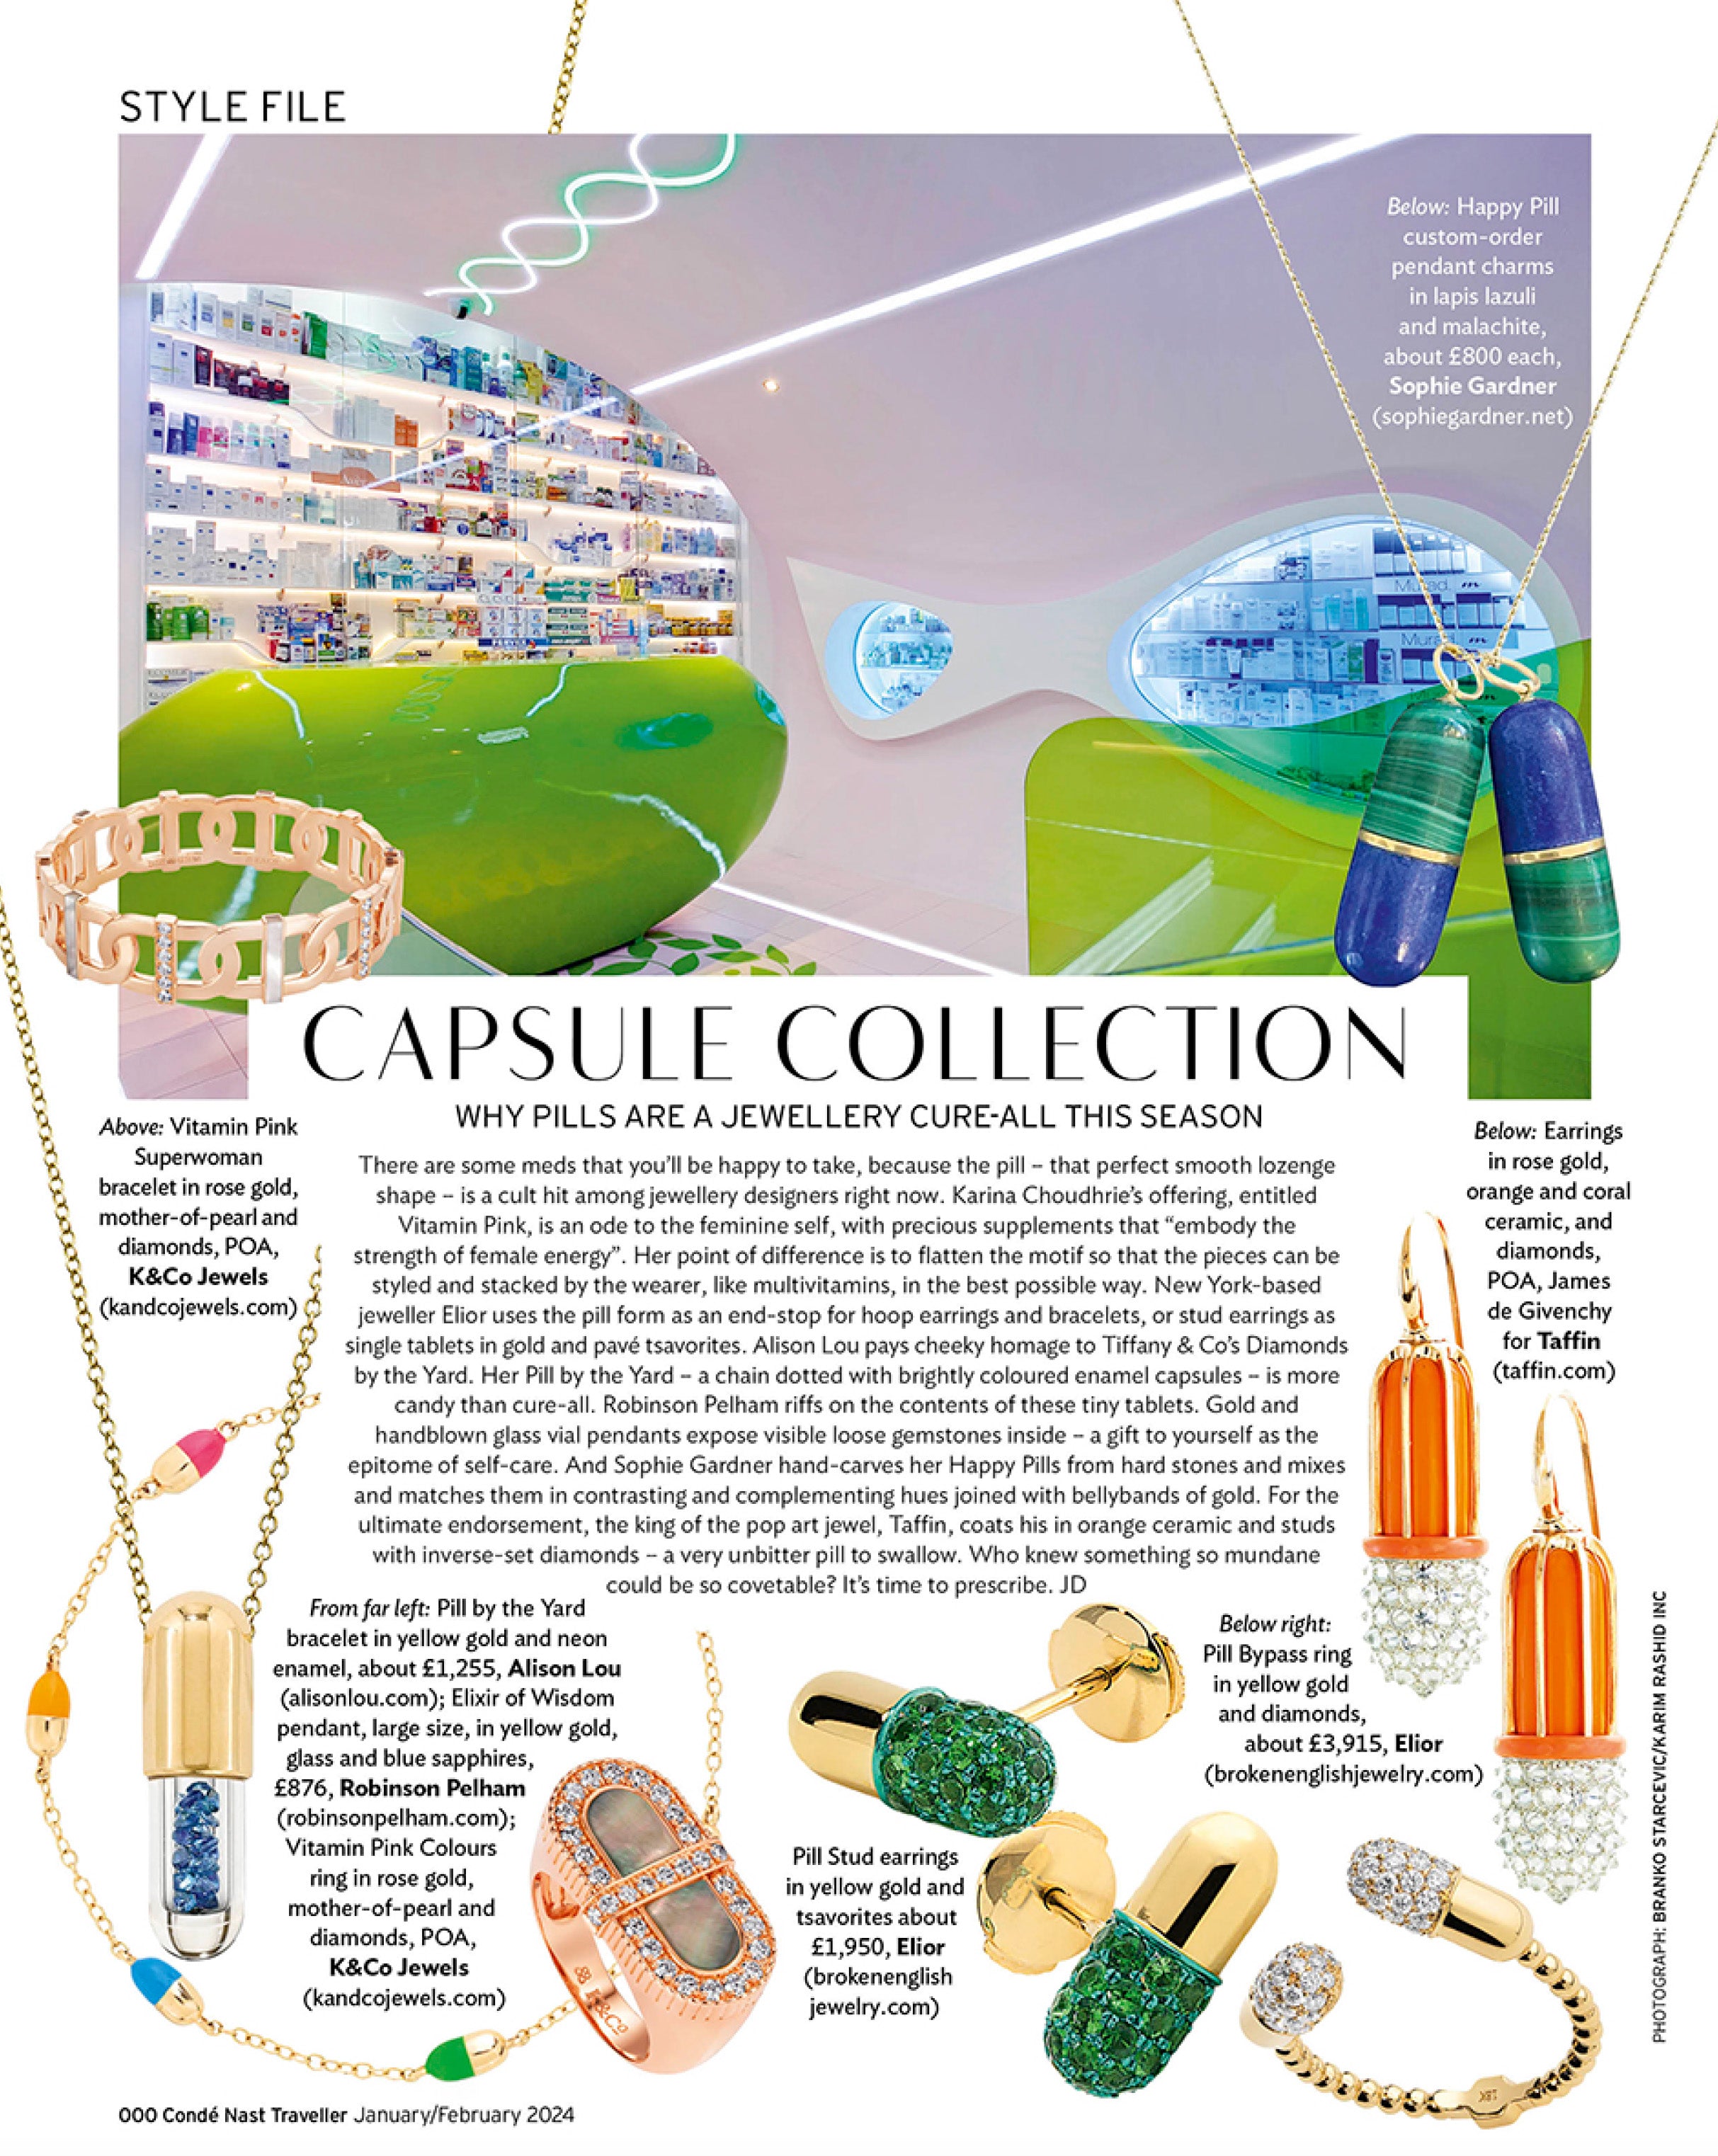 Broken English Jewelry - Elior - Featured in Conde Nast Traveller, January 2024,  The Capsule Collection, Why Pills are a Jewellery Cure-All this Season